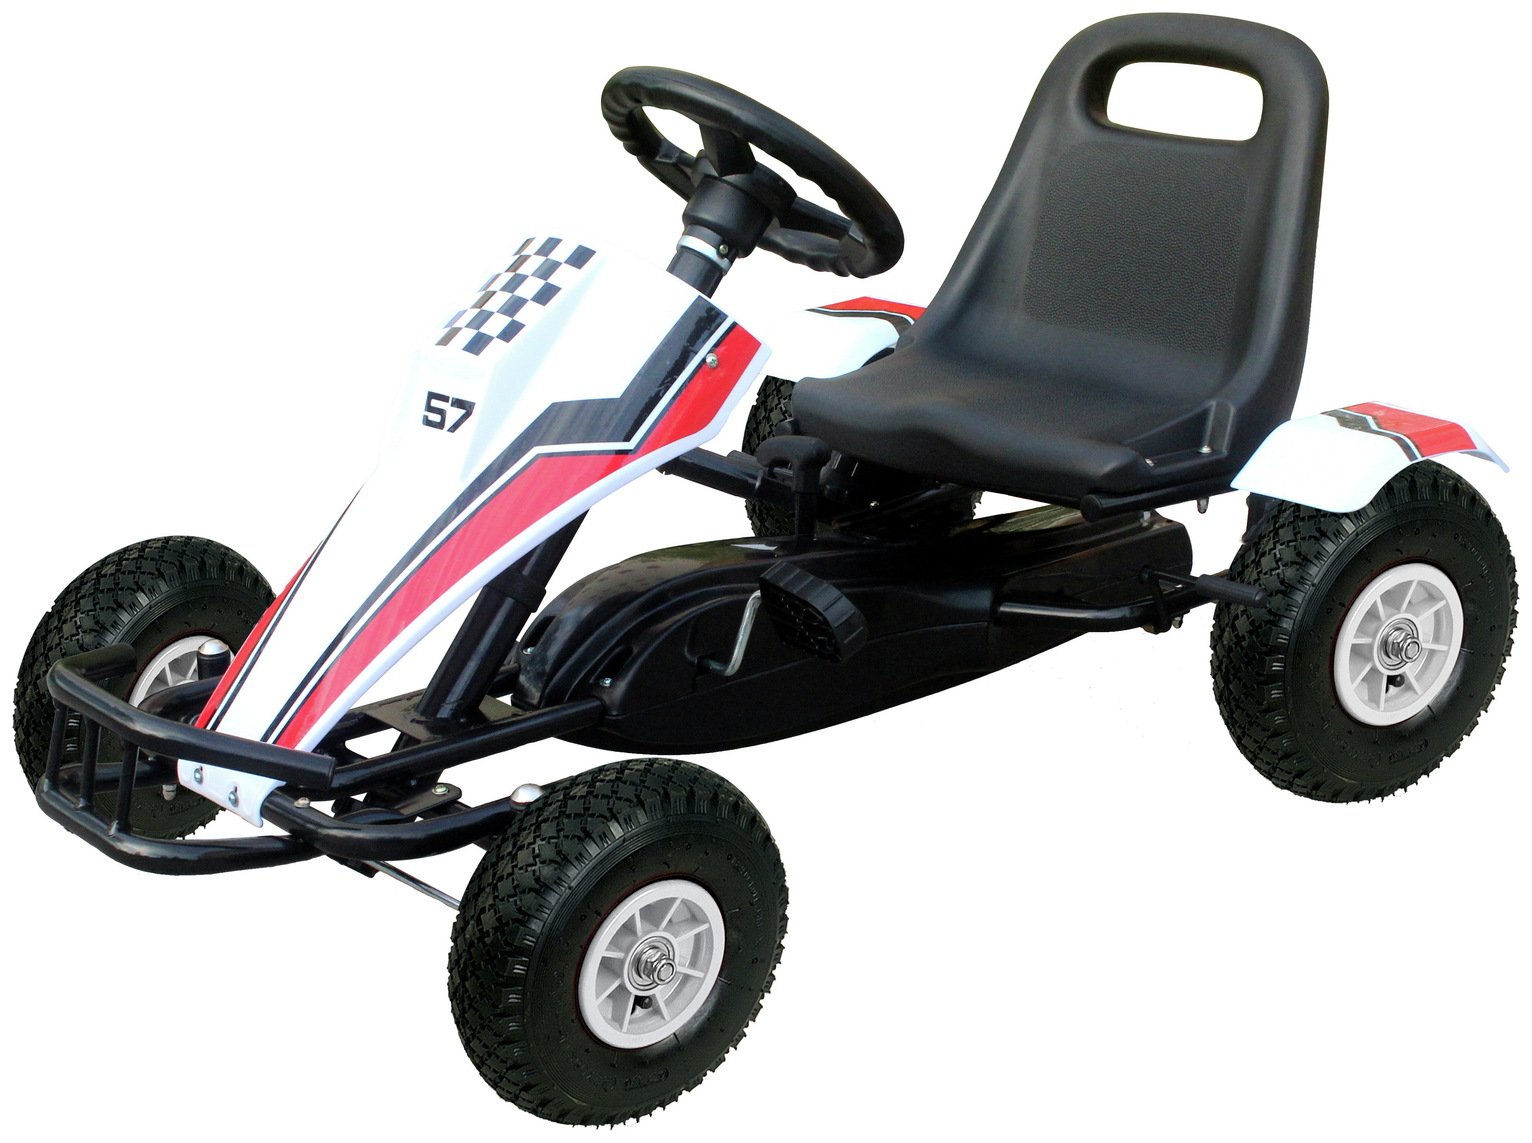 Spike Go Kart Plus Ride On review